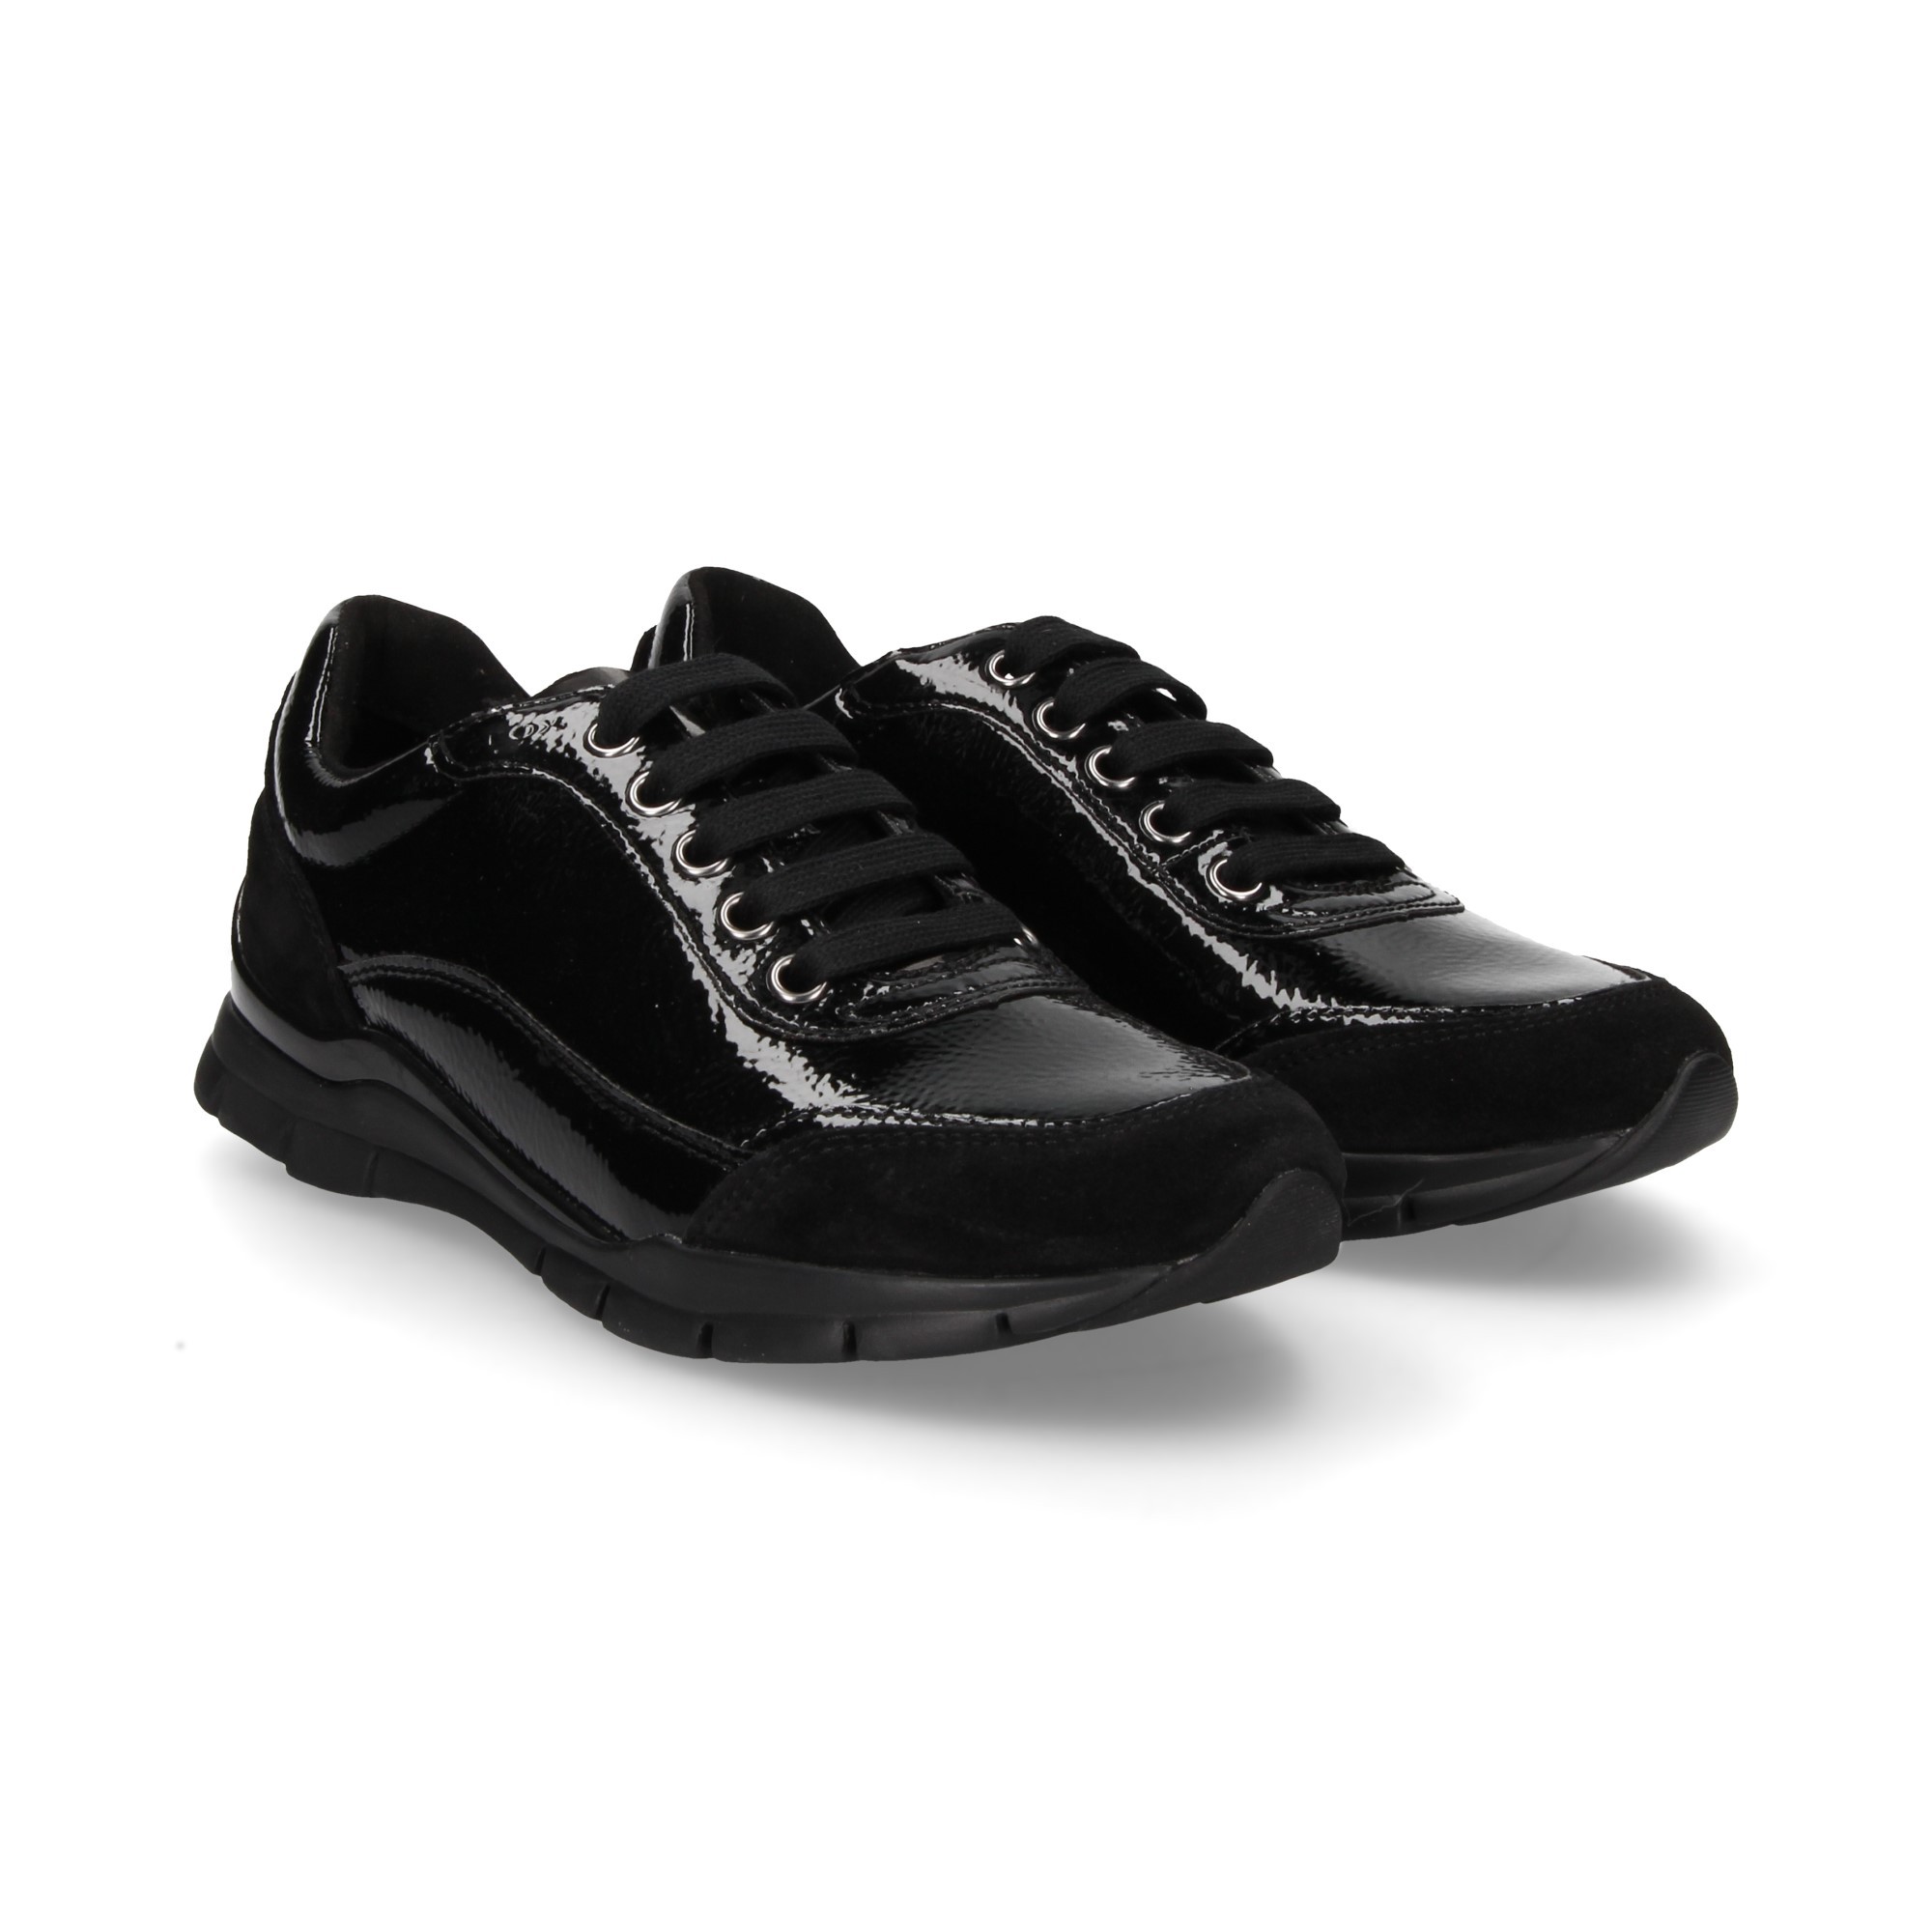 sporty-black-patent-leather-cord